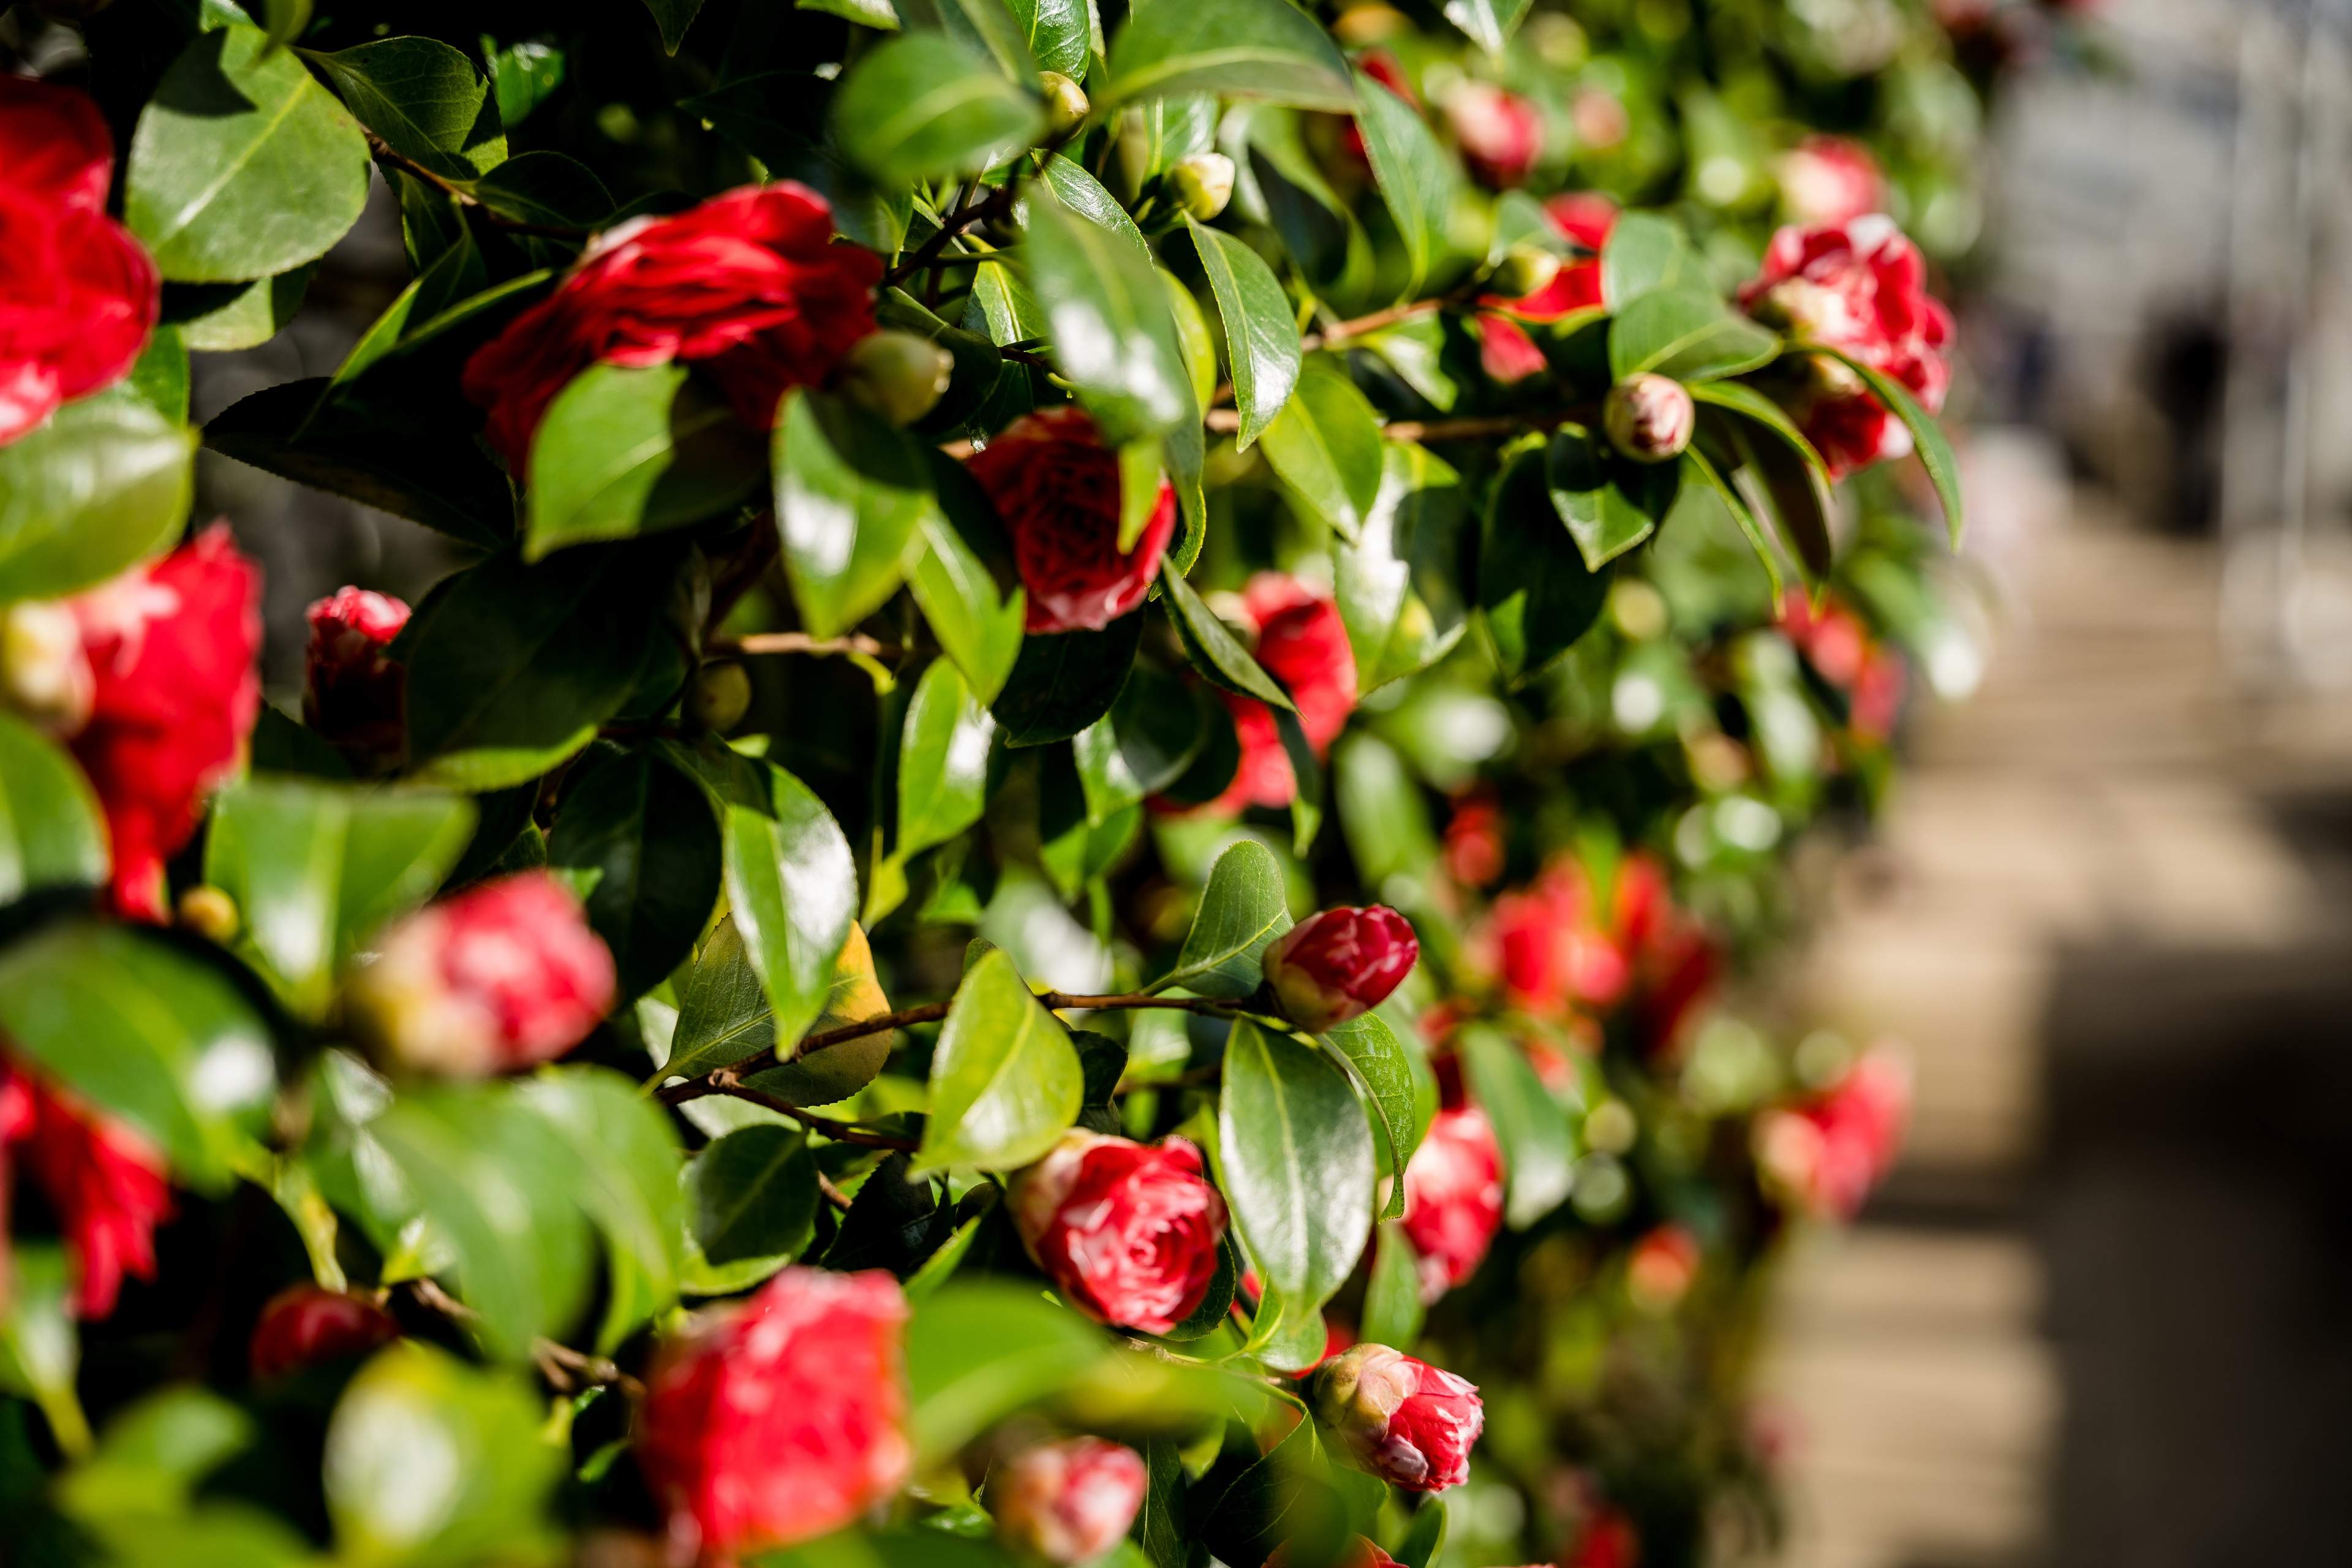 Red Camellias flowers springing from the green wall at Camellia Show, Chiswick House & Gardens, London, UK